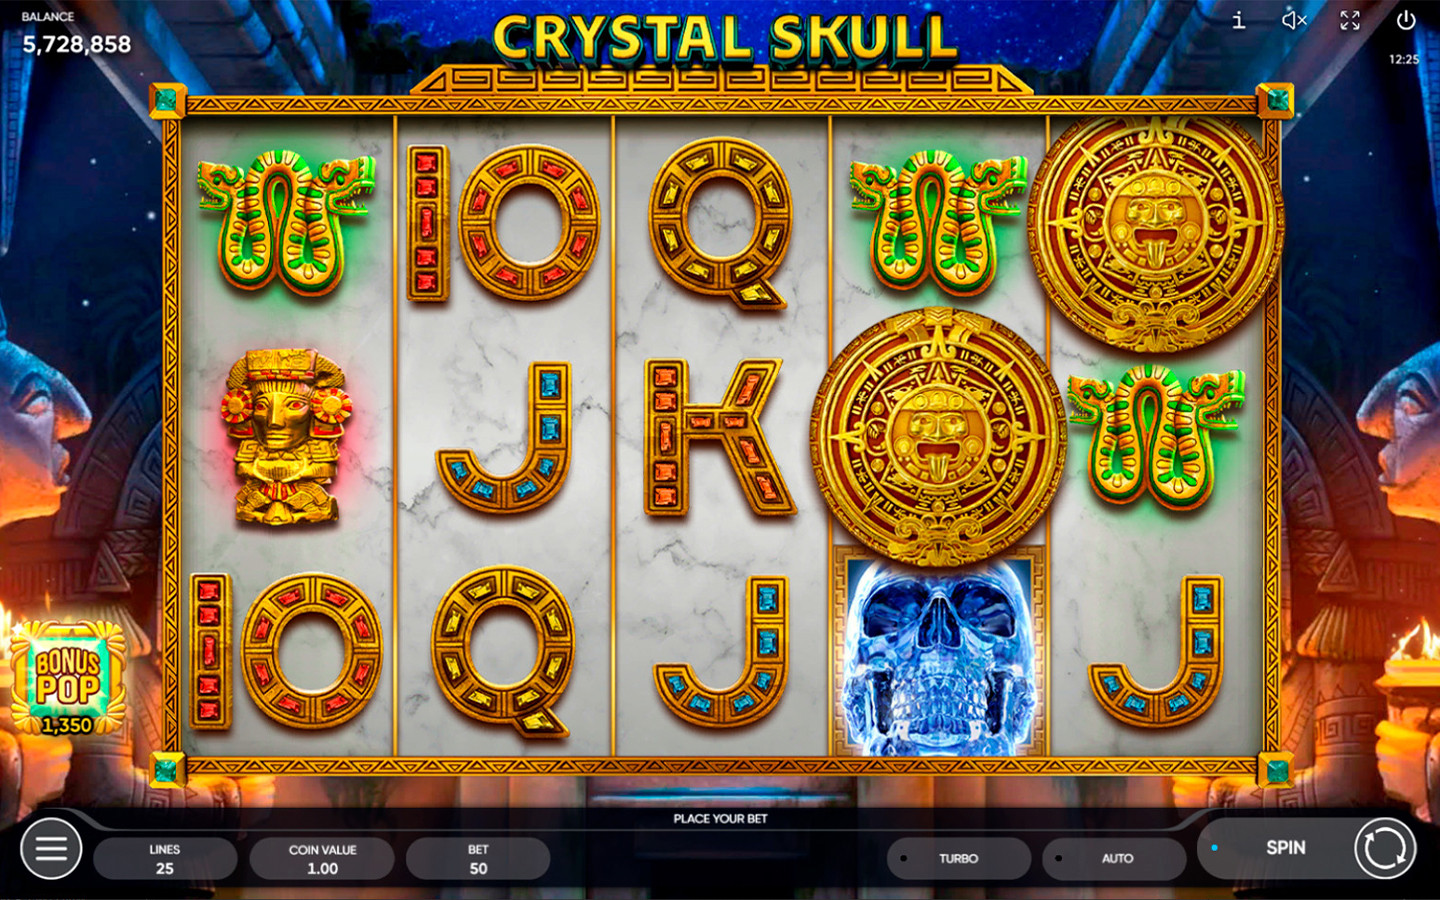 Big Win New Online Slot   Crystal Skull   Endorphina - All Features